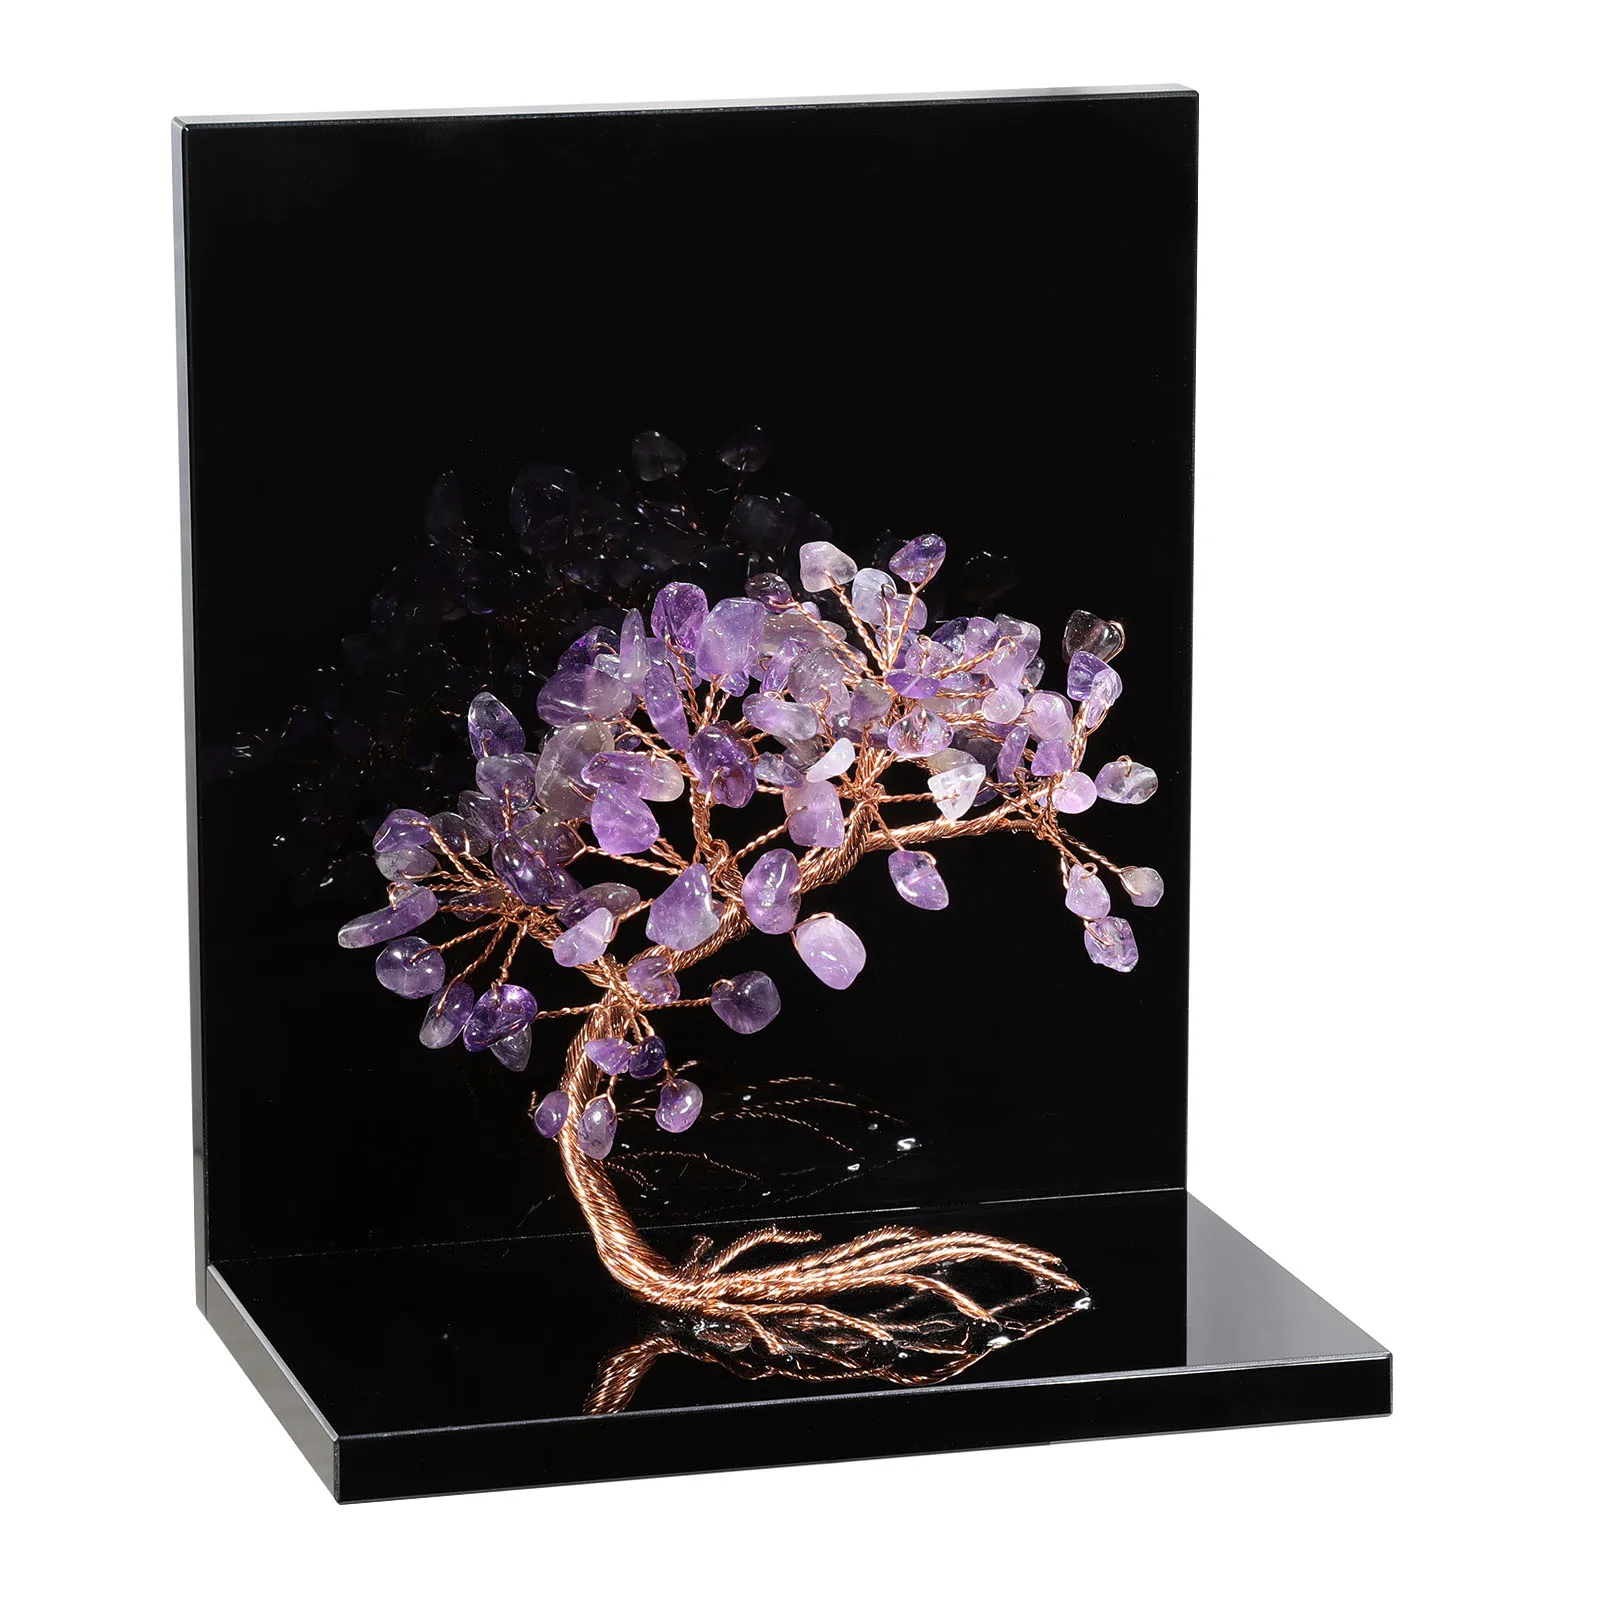 1 Pair Natural Amethyst Crystal Money Tree Bookends Acrylic Book Ends For Shelves Desktop Organizer Home Office Room Decor